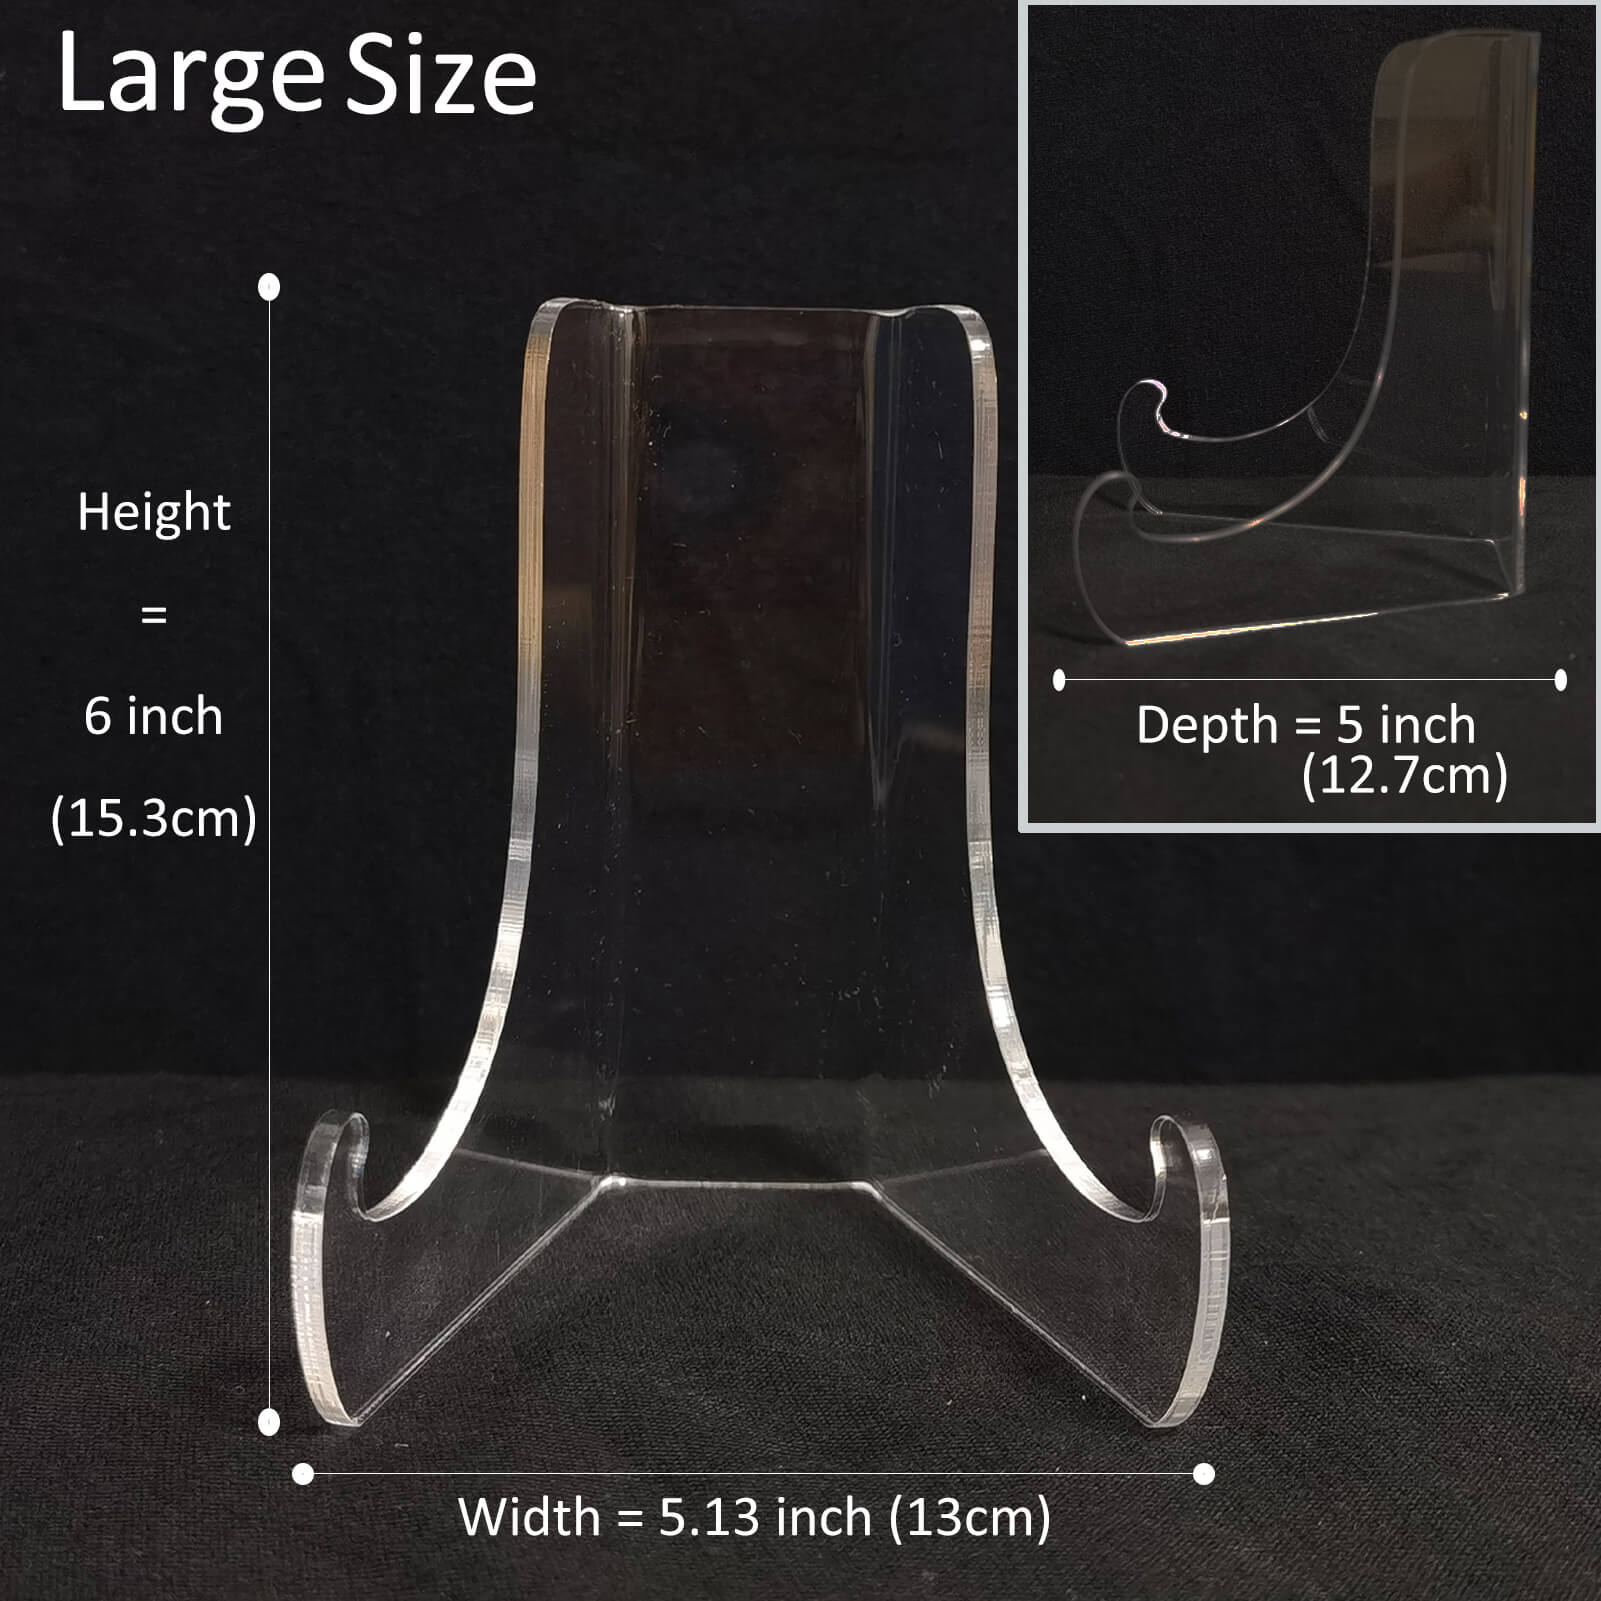 Boloyo 60-Degree Angle Acrylic Book Stand with Shallow Support Ledges